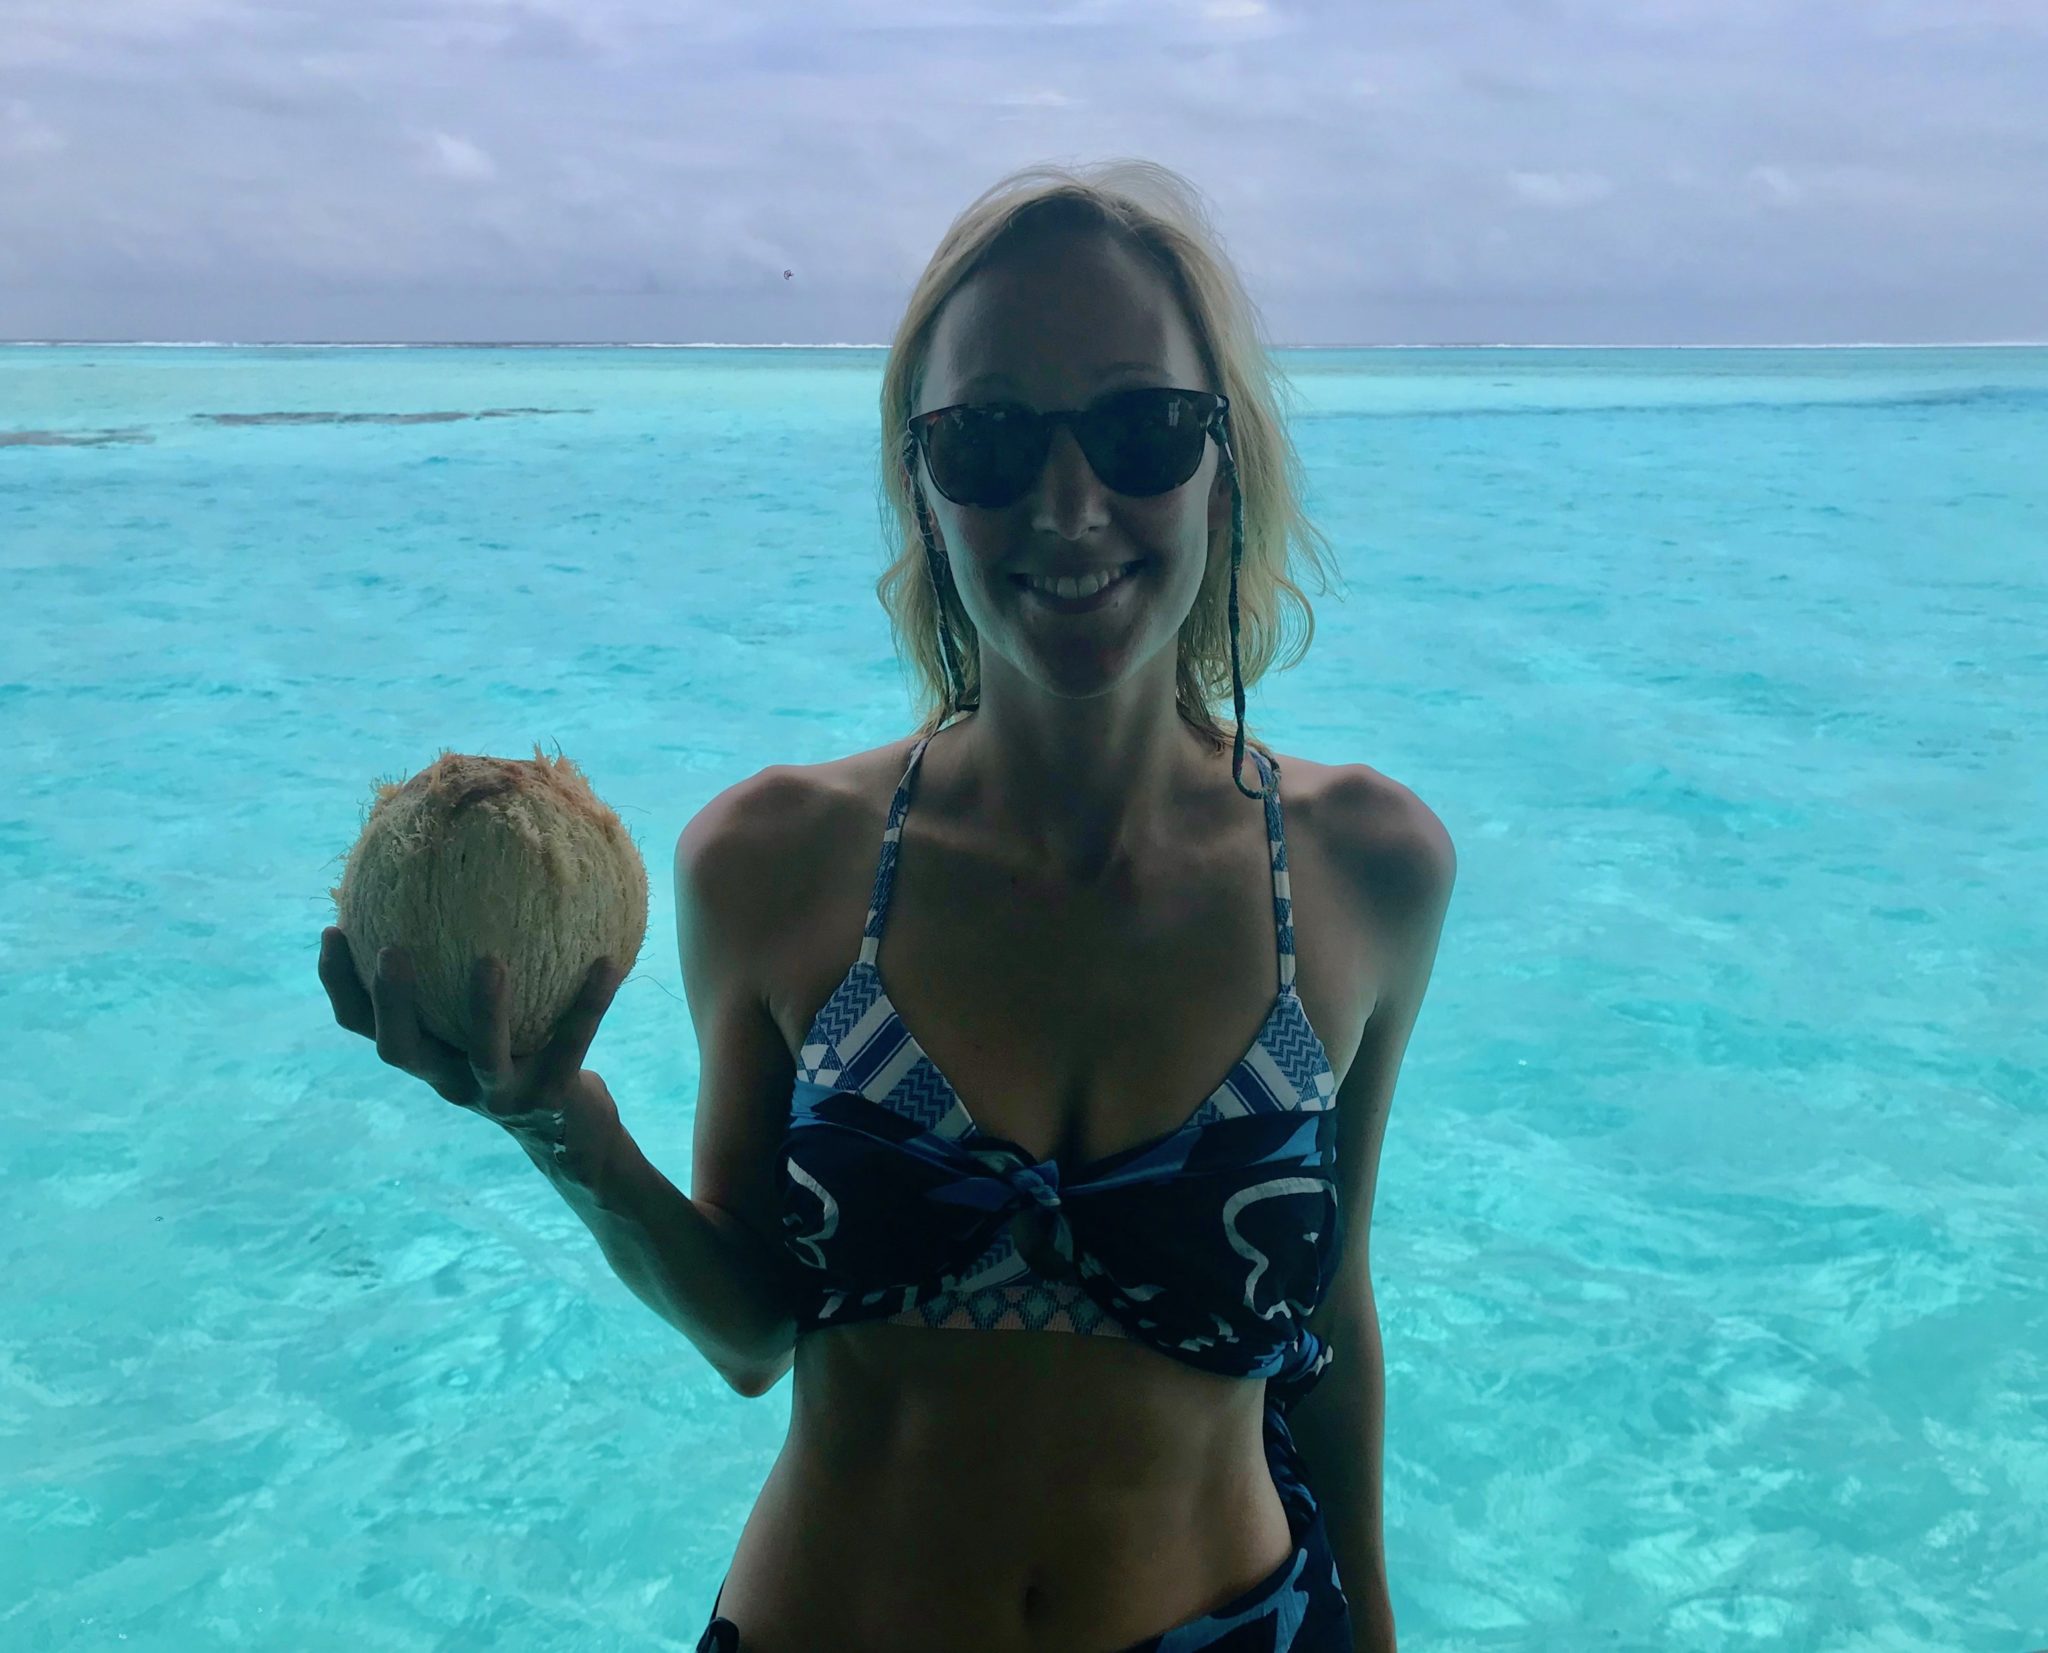 Hayley holding a coconut with clear blue ocean behind